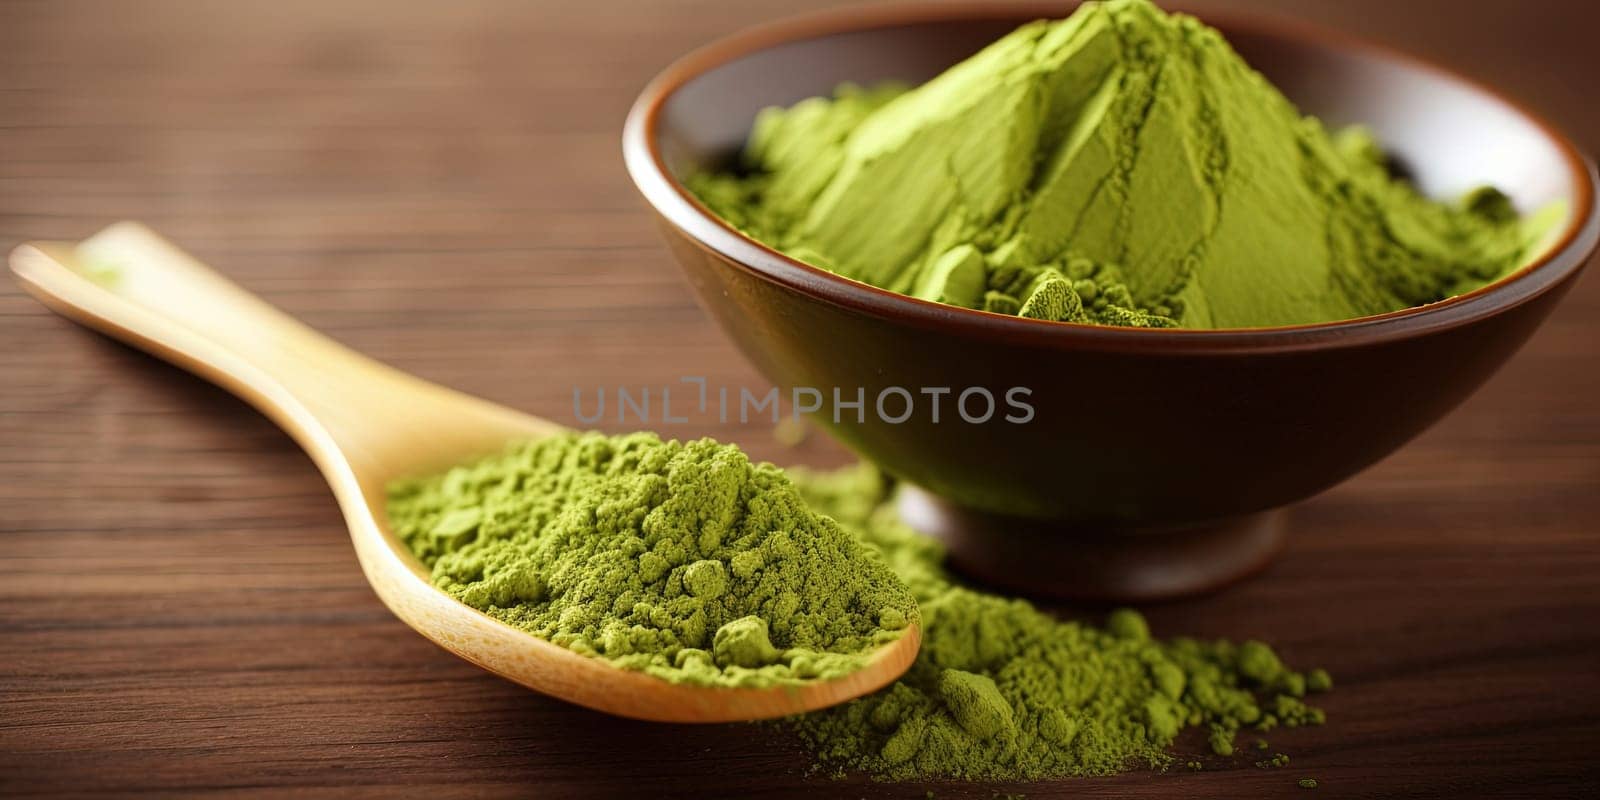 MAtcha tea powder in a wooden spoon on a table